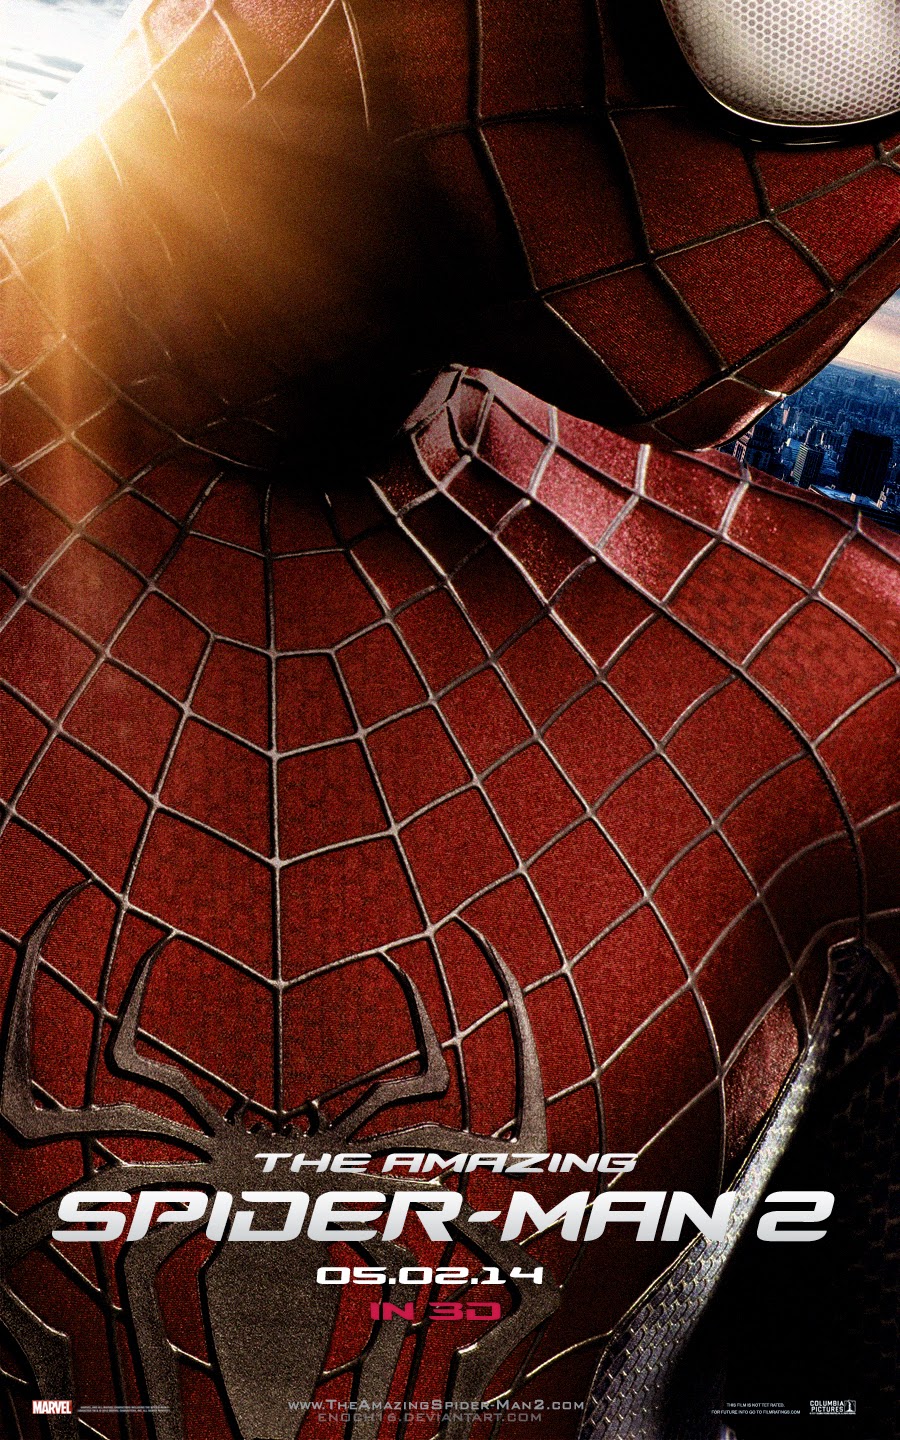 http://www.maximumextreme.net/2014/05/the-amazing-spider-man-2-movie-review.html